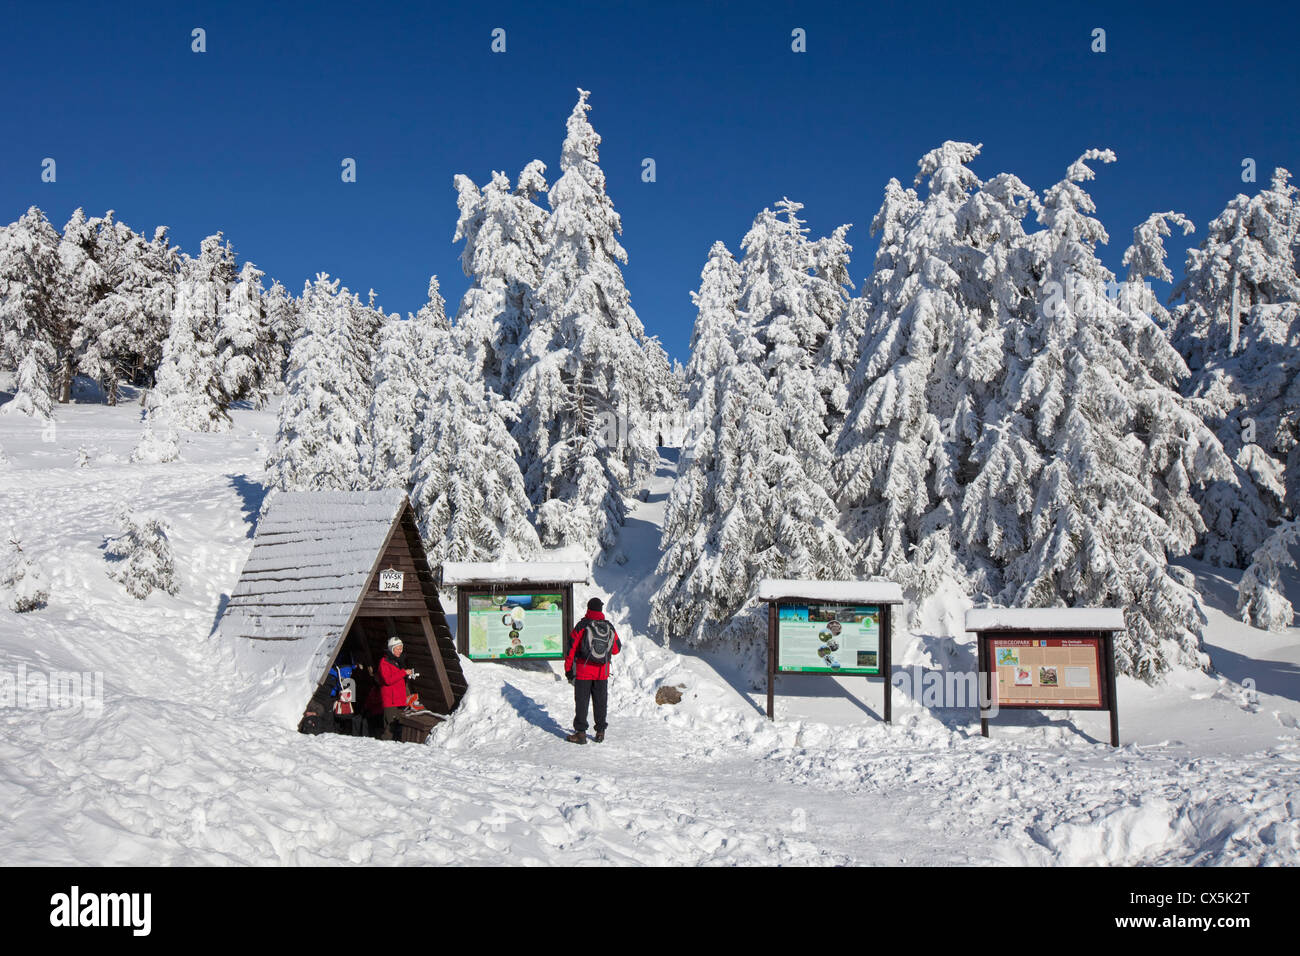 Tourists at shelter and frozen snow covered spruce trees in winter at Brocken, Blocksberg in the Harz National Park, Germany Stock Photo